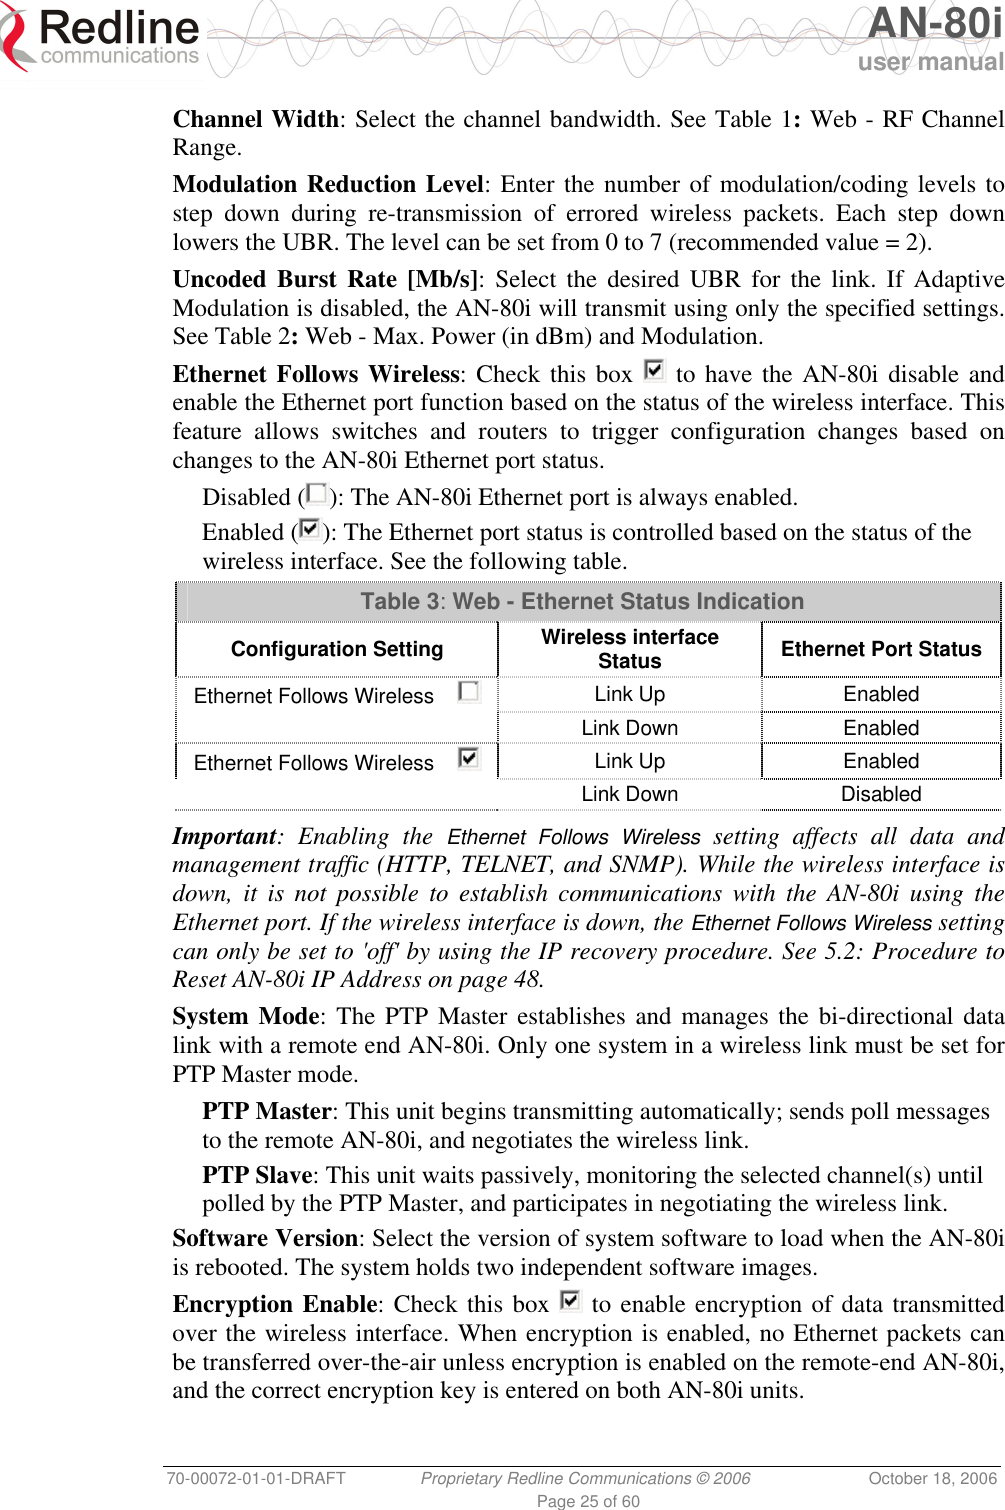   AN-80i user manual 70-00072-01-01-DRAFT  Proprietary Redline Communications © 2006  October 18, 2006 Page 25 of 60 Channel Width: Select the channel bandwidth. See Table 1: Web - RF Channel Range. Modulation Reduction Level: Enter the number of modulation/coding levels to step down during re-transmission of errored wireless packets. Each step down lowers the UBR. The level can be set from 0 to 7 (recommended value = 2). Uncoded Burst Rate [Mb/s]: Select the desired UBR for the link. If Adaptive Modulation is disabled, the AN-80i will transmit using only the specified settings. See Table 2: Web - Max. Power (in dBm) and Modulation.  Ethernet Follows Wireless: Check this box   to have the AN-80i disable and enable the Ethernet port function based on the status of the wireless interface. This feature allows switches and routers to trigger configuration changes based on changes to the AN-80i Ethernet port status. Disabled ( ): The AN-80i Ethernet port is always enabled. Enabled ( ): The Ethernet port status is controlled based on the status of the wireless interface. See the following table. Table 3: Web - Ethernet Status Indication Configuration Setting  Wireless interface Status  Ethernet Port Status Ethernet Follows Wireless      Link Up  Enabled  Link Down Enabled Ethernet Follows Wireless      Link Up  Enabled  Link Down Disabled  Important: Enabling the Ethernet Follows Wireless setting affects all data and management traffic (HTTP, TELNET, and SNMP). While the wireless interface is down, it is not possible to establish communications with the AN-80i using the Ethernet port. If the wireless interface is down, the Ethernet Follows Wireless setting can only be set to &apos;off&apos; by using the IP recovery procedure. See 5.2: Procedure to Reset AN-80i IP Address on page 48. System Mode: The PTP Master establishes and manages the bi-directional data link with a remote end AN-80i. Only one system in a wireless link must be set for PTP Master mode. PTP Master: This unit begins transmitting automatically; sends poll messages to the remote AN-80i, and negotiates the wireless link. PTP Slave: This unit waits passively, monitoring the selected channel(s) until polled by the PTP Master, and participates in negotiating the wireless link. Software Version: Select the version of system software to load when the AN-80i is rebooted. The system holds two independent software images. Encryption Enable: Check this box   to enable encryption of data transmitted over the wireless interface. When encryption is enabled, no Ethernet packets can be transferred over-the-air unless encryption is enabled on the remote-end AN-80i, and the correct encryption key is entered on both AN-80i units. 